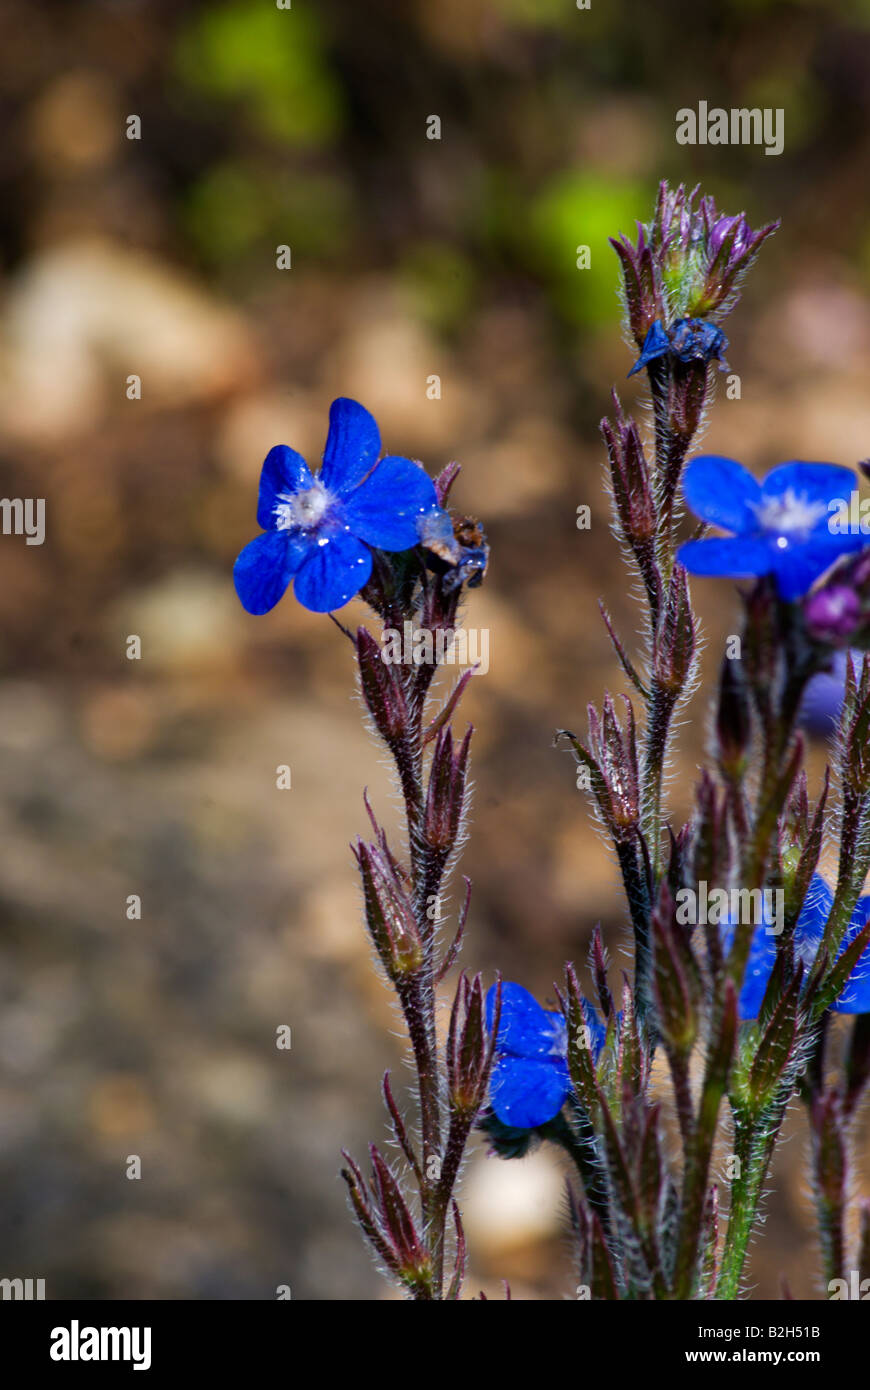 Anchusa azurea Miller in bloom, also known as Italian bugloss. Stock Photo